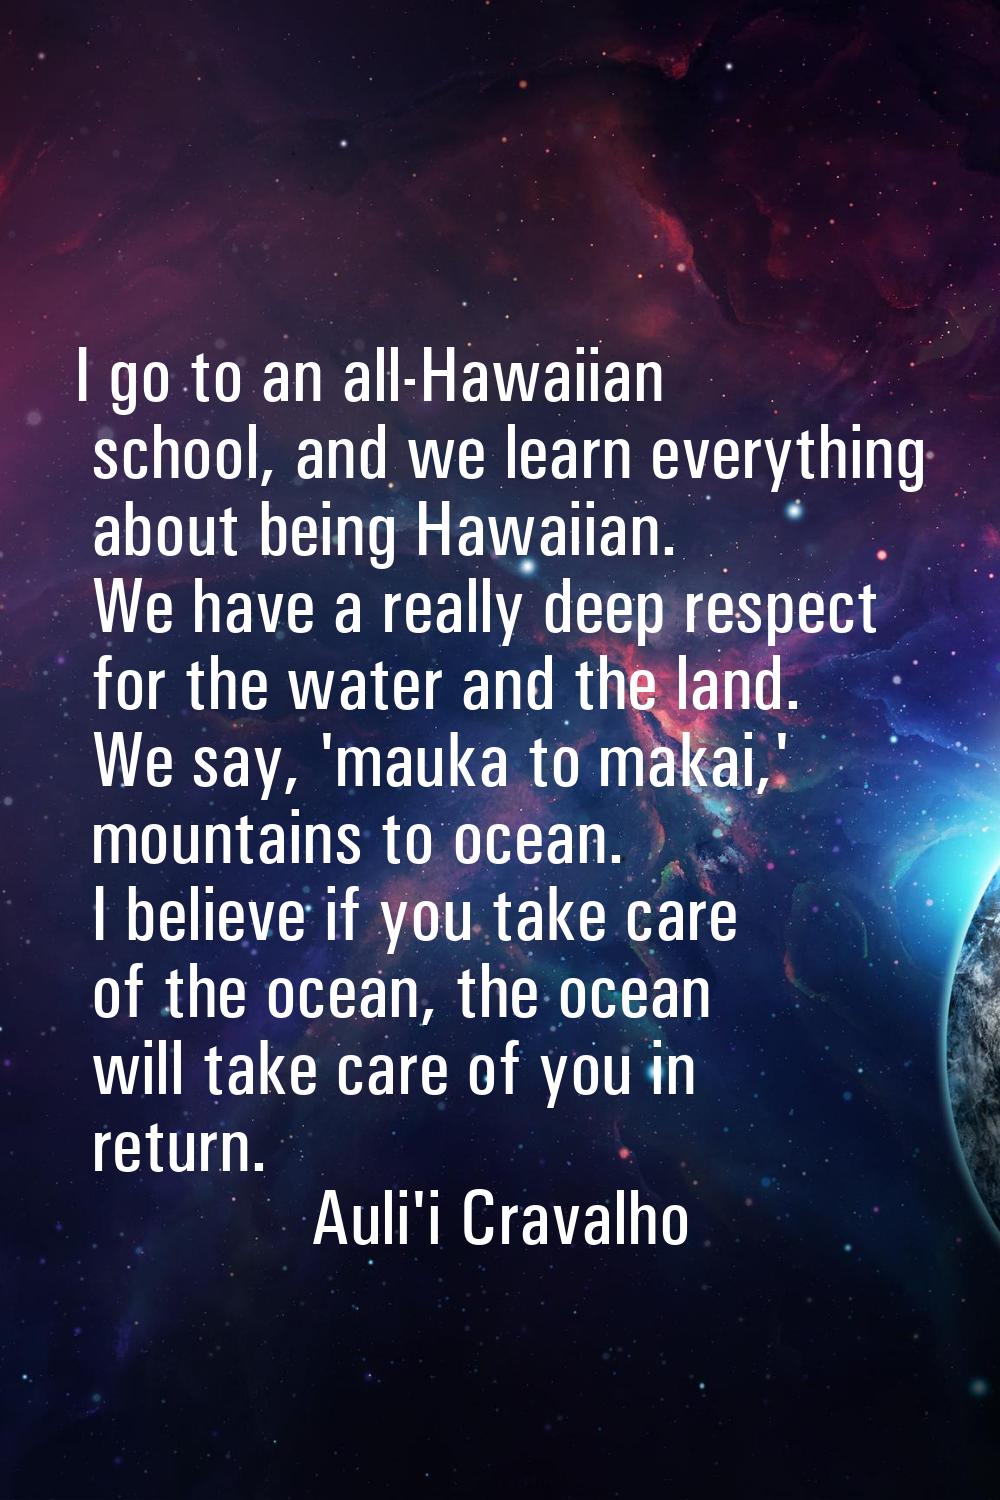 I go to an all-Hawaiian school, and we learn everything about being Hawaiian. We have a really deep